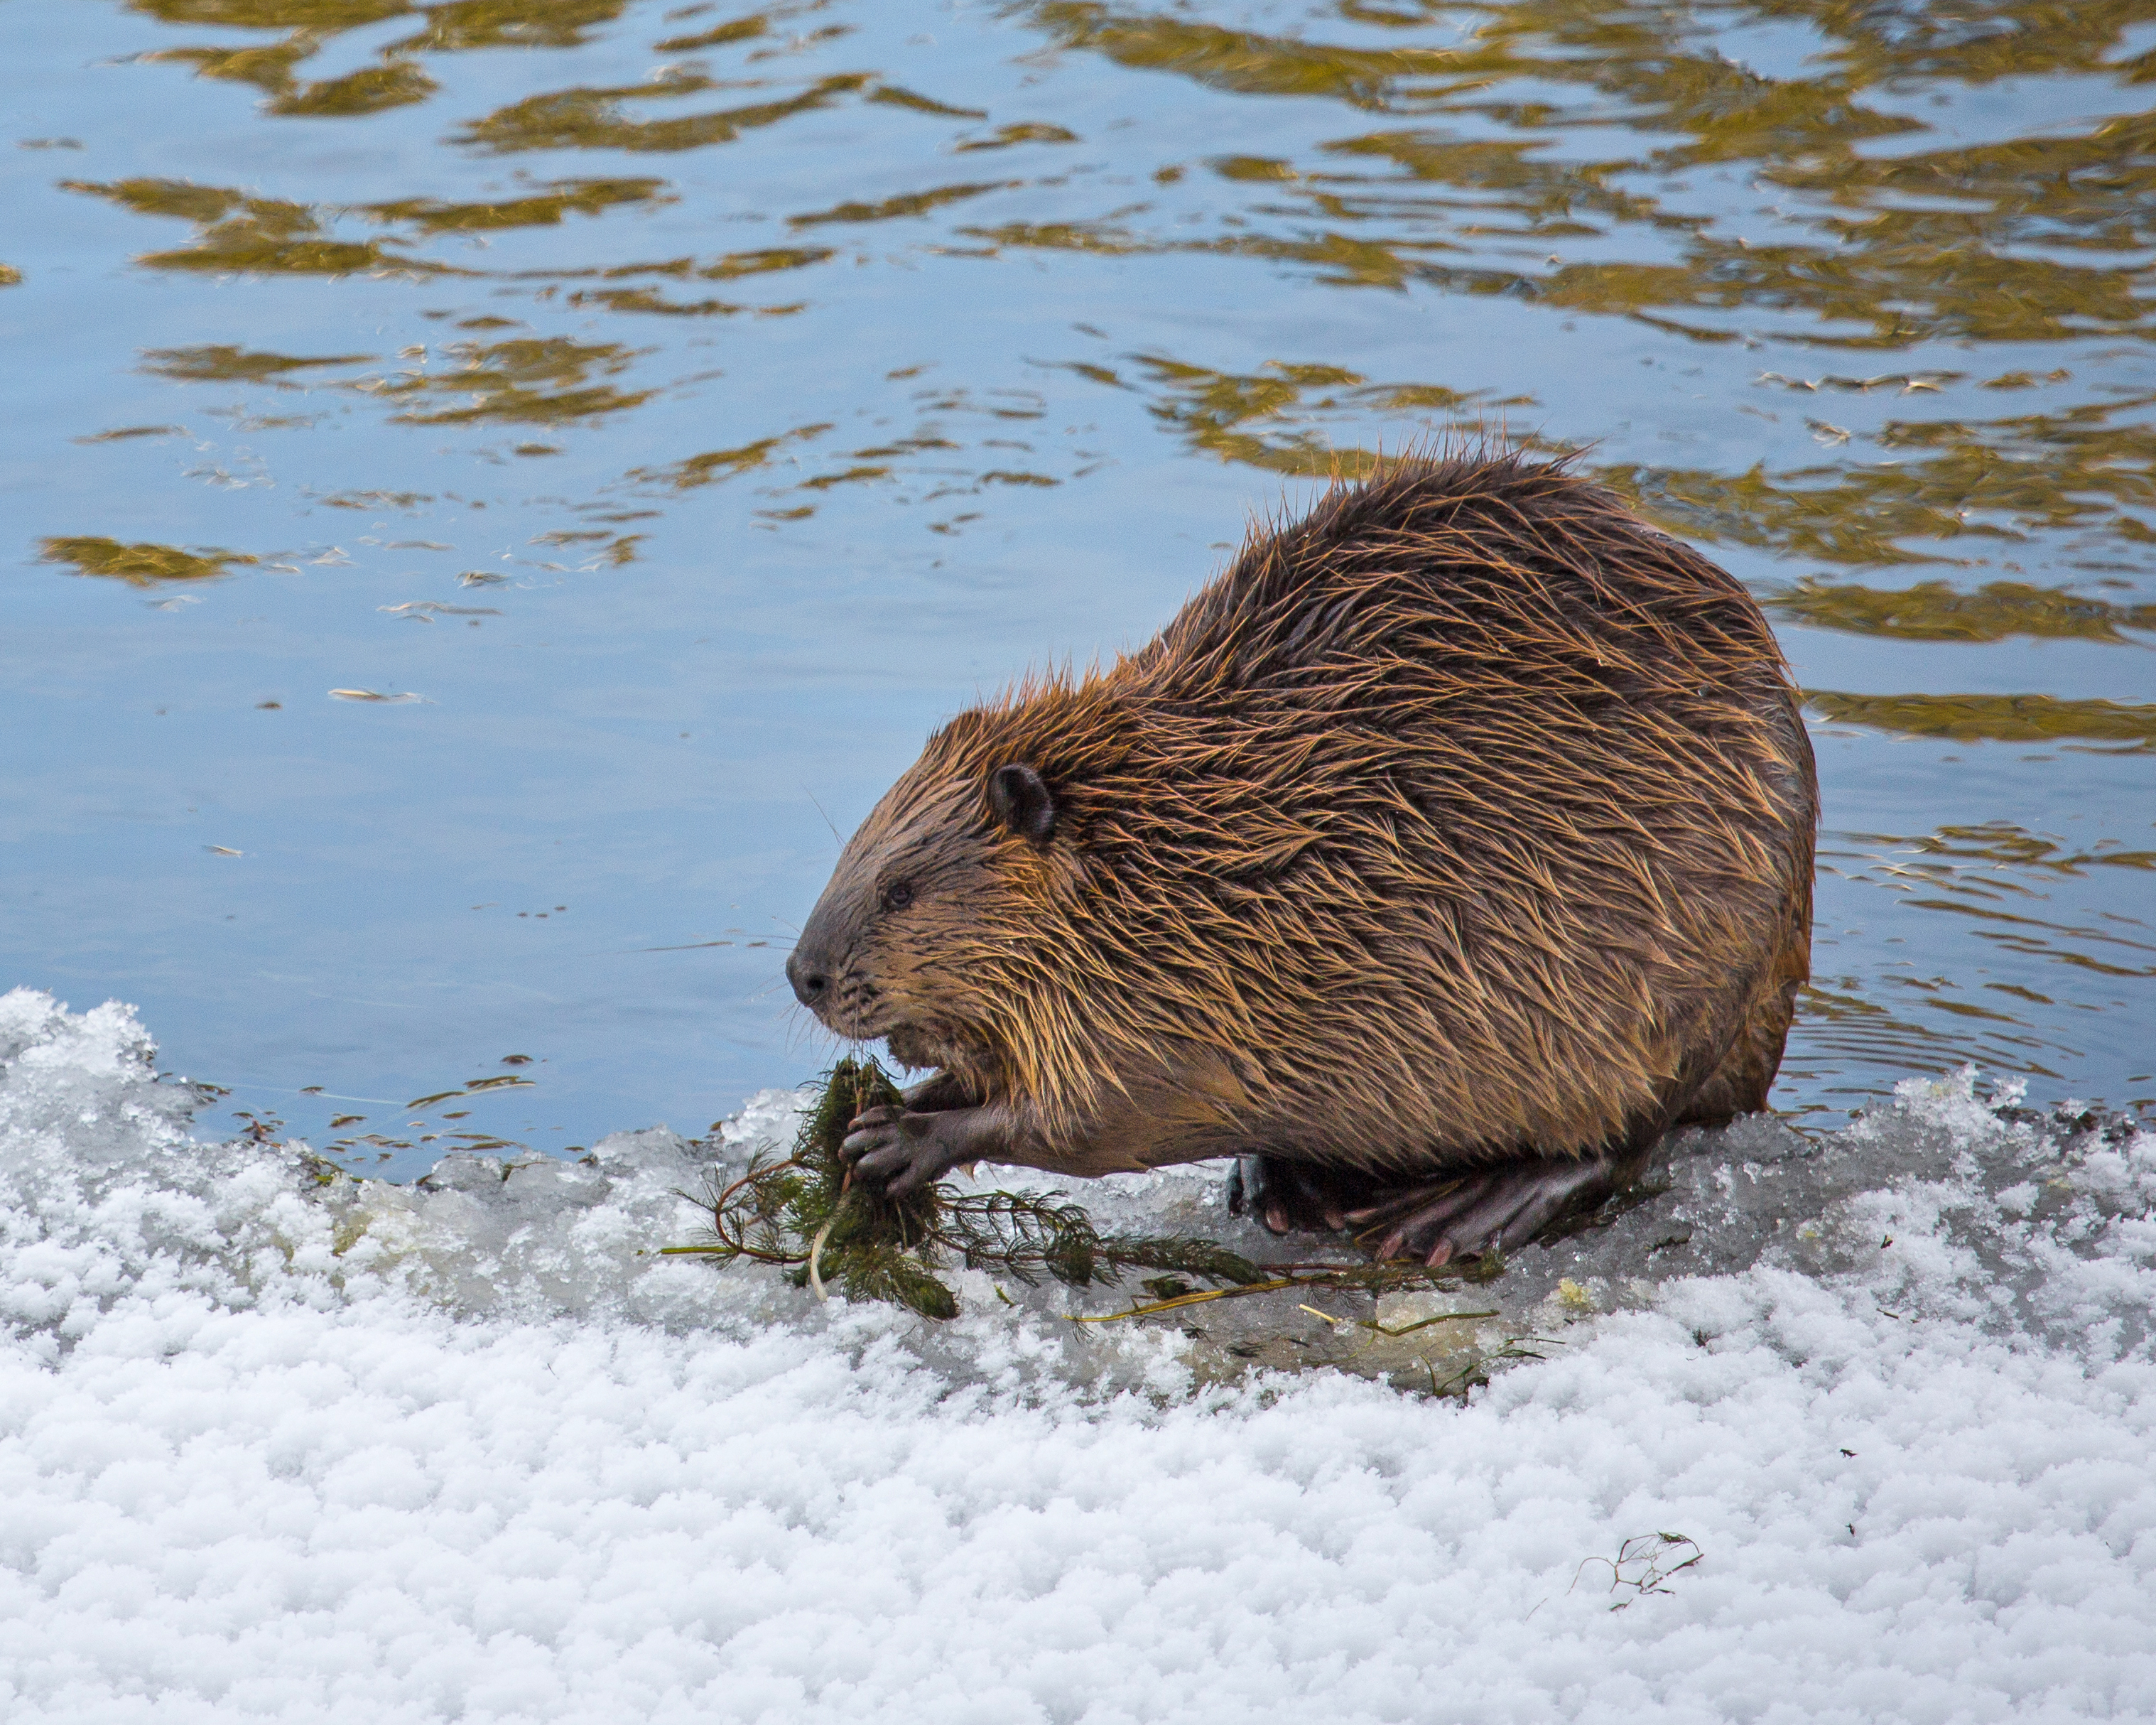 Beaver on a snowy bank of the Yellowstone River